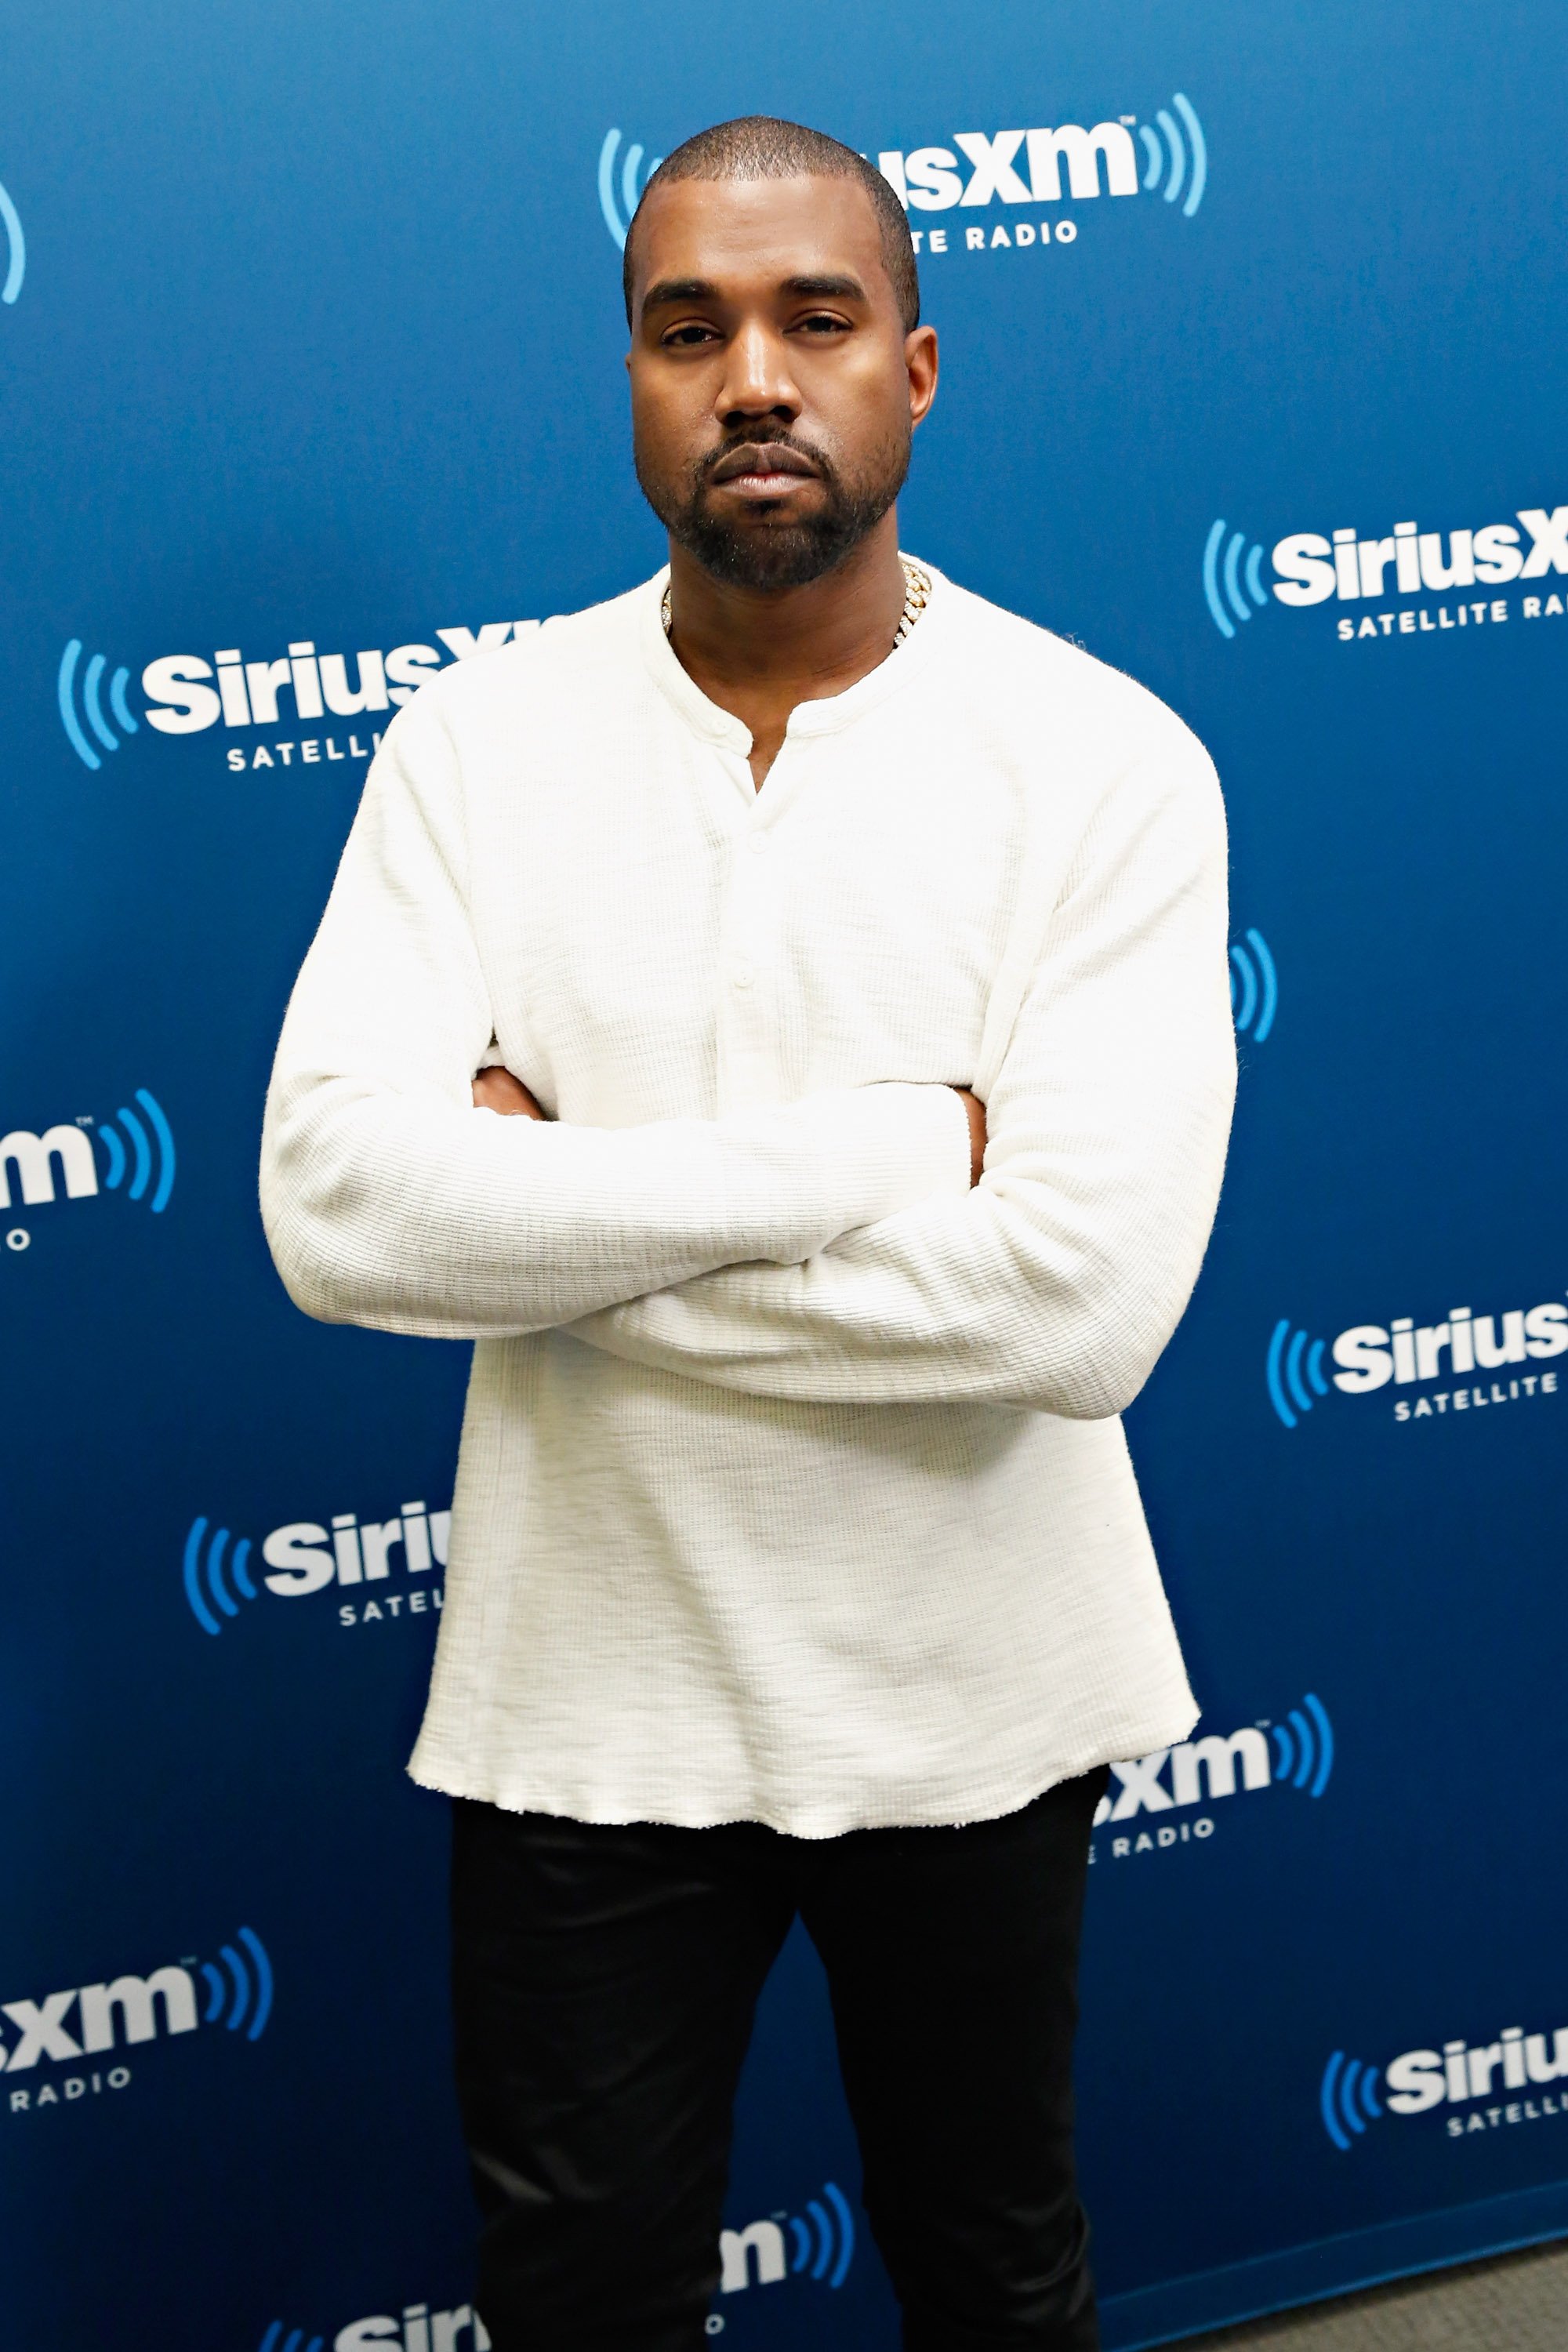 Kanye West at the SiriusXM Studios in 2013. | Source: Getty Images